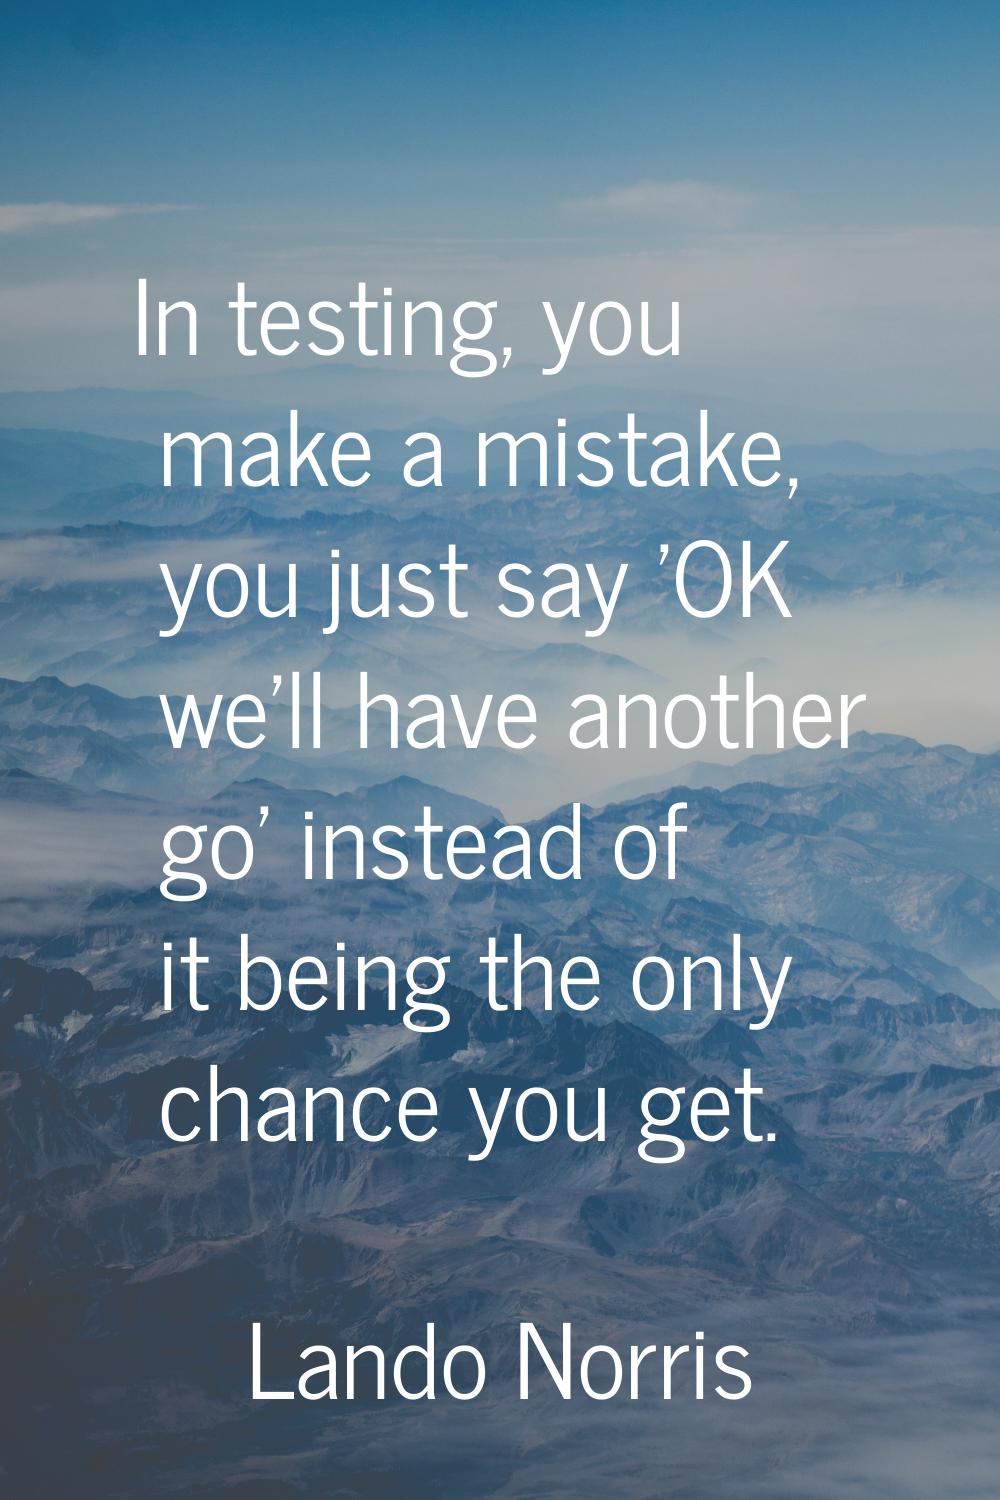 In testing, you make a mistake, you just say 'OK we'll have another go' instead of it being the onl